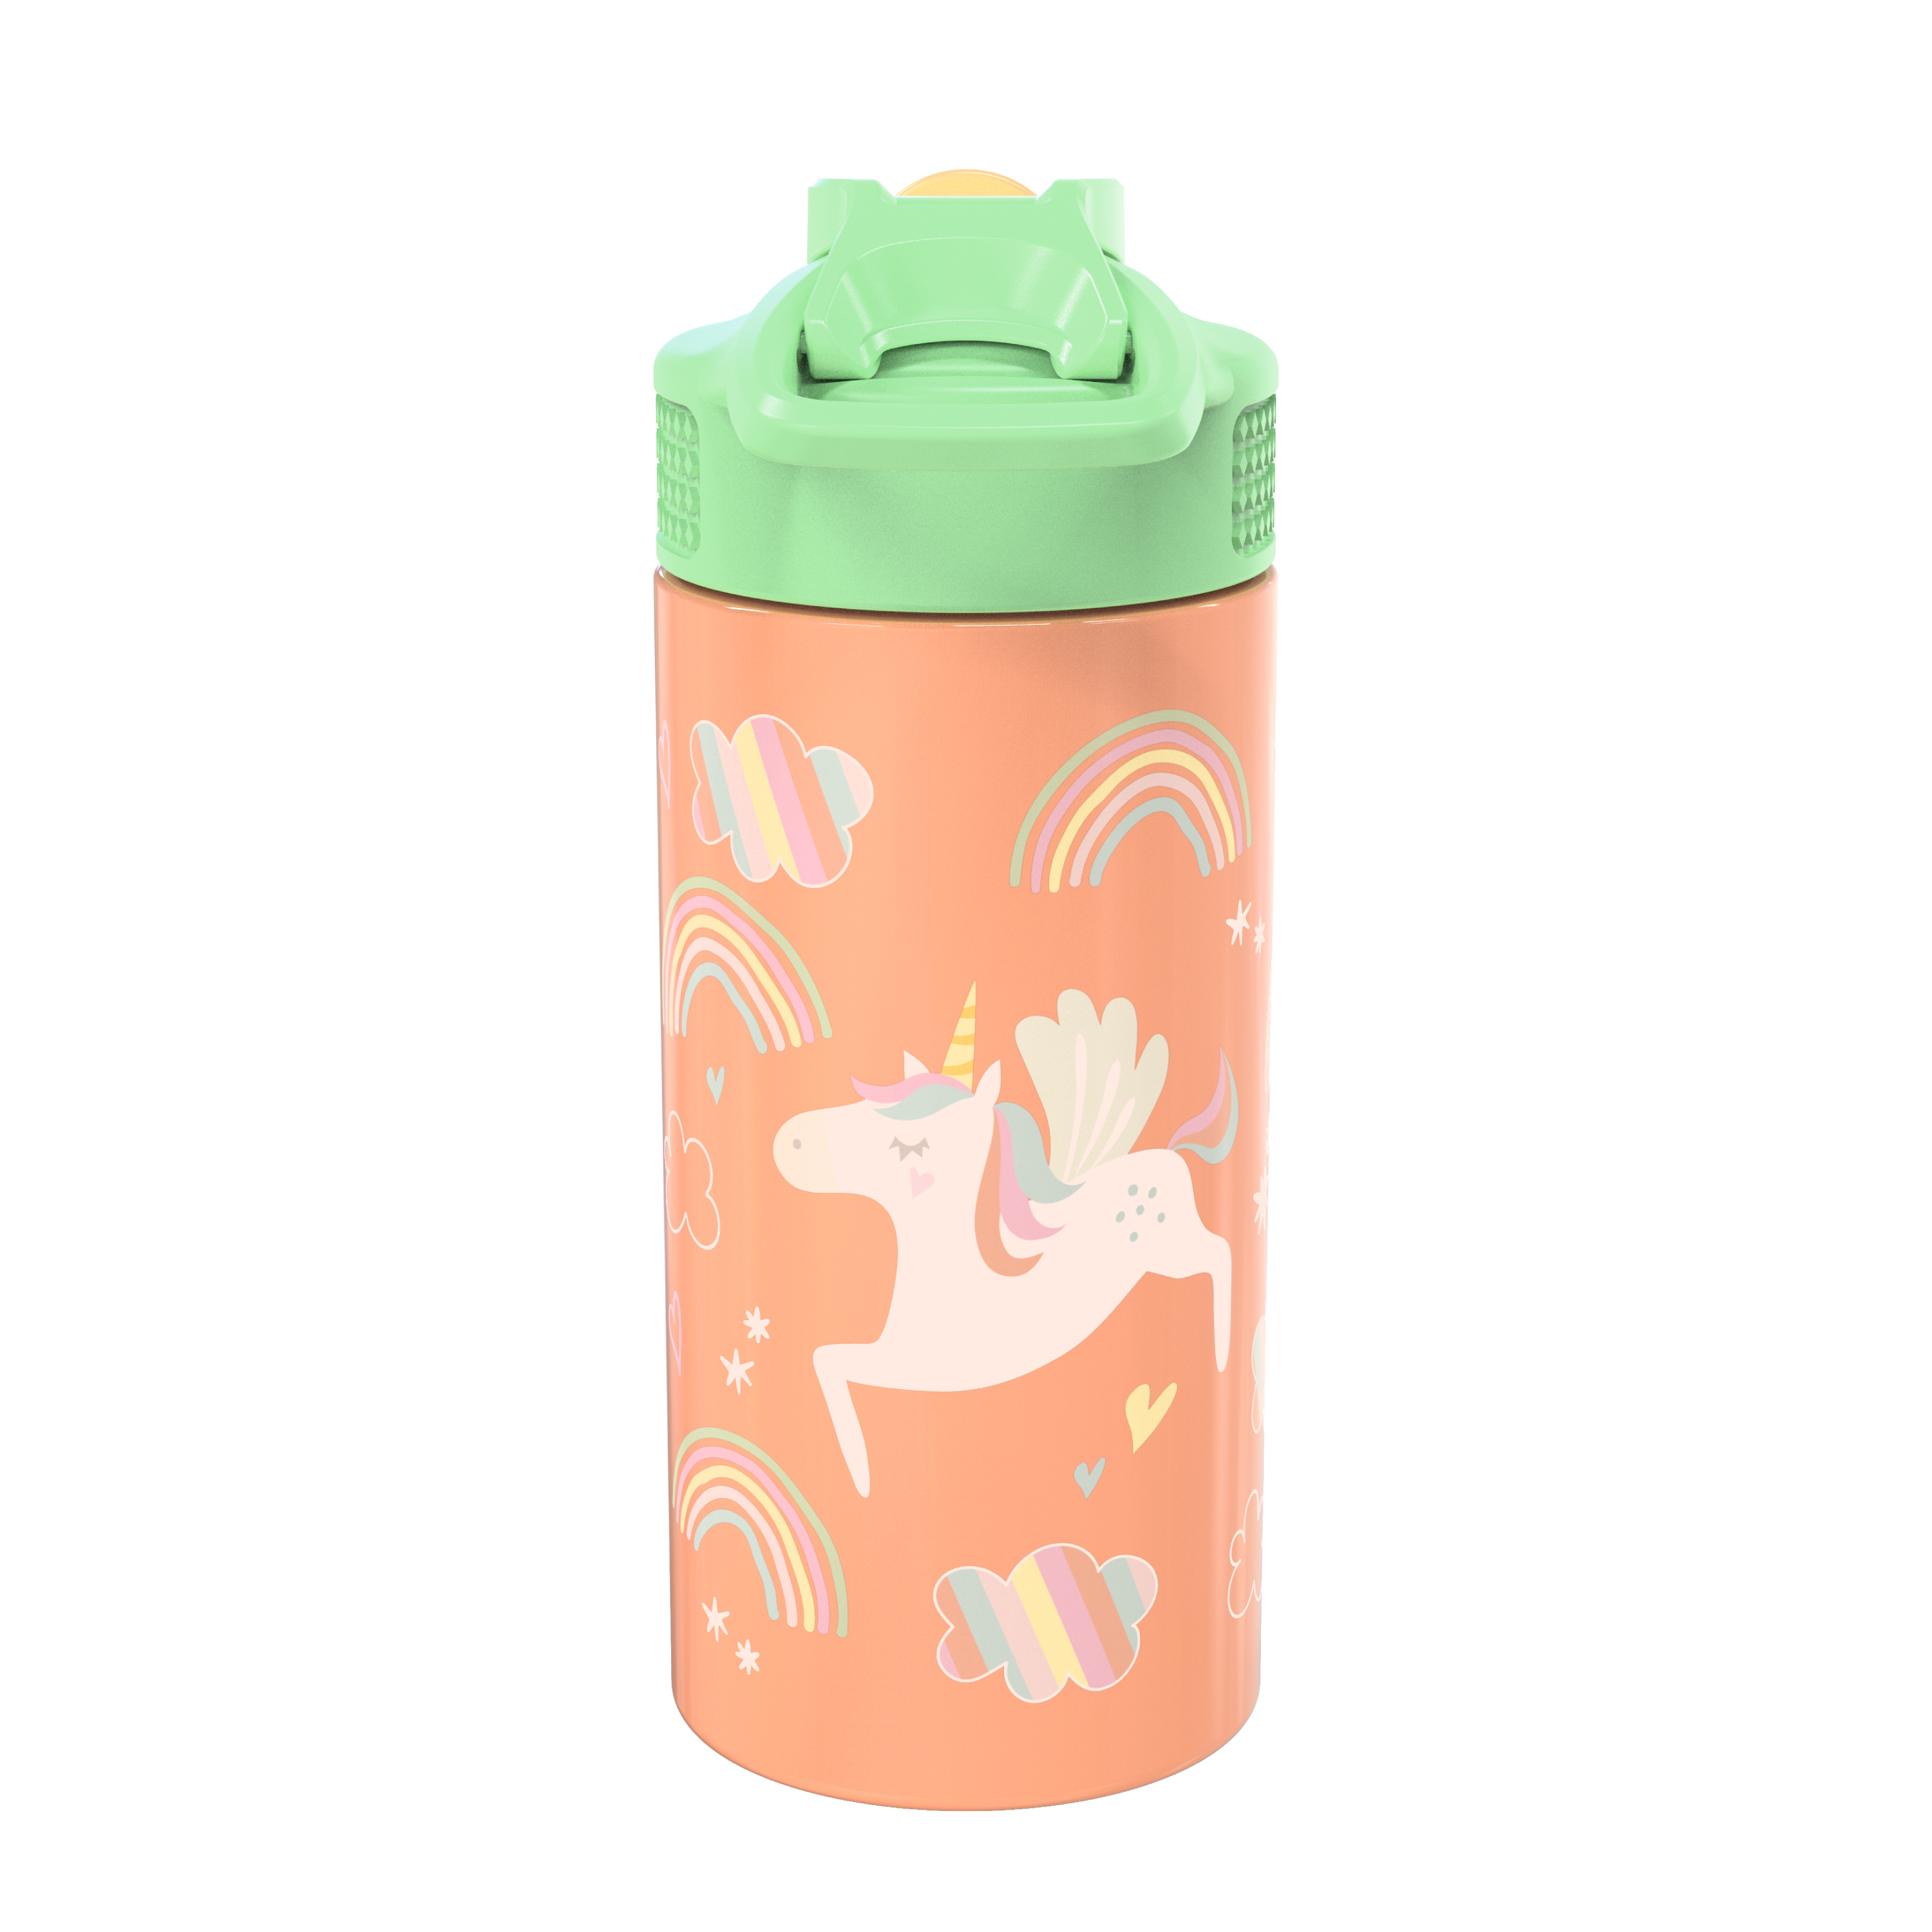 Unicorn 14 ounce Stainless Steel Vacuum Insulated Water Bottle, Multicolored slideshow image 3